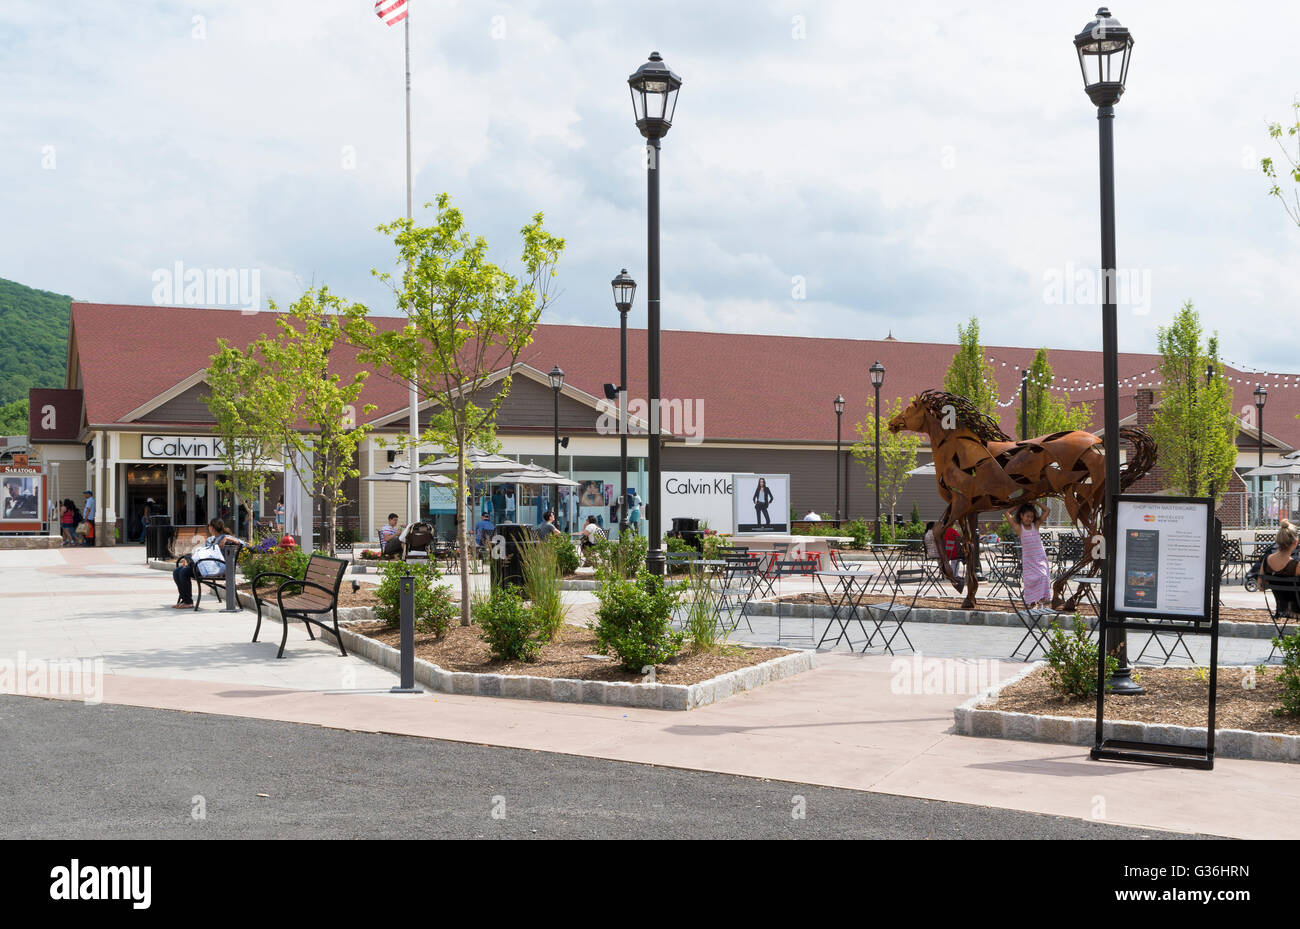 Woodbury Common outlet mall in New York looking towards the Calvin Klein  designer store and sculpture of a horse Stock Photo - Alamy